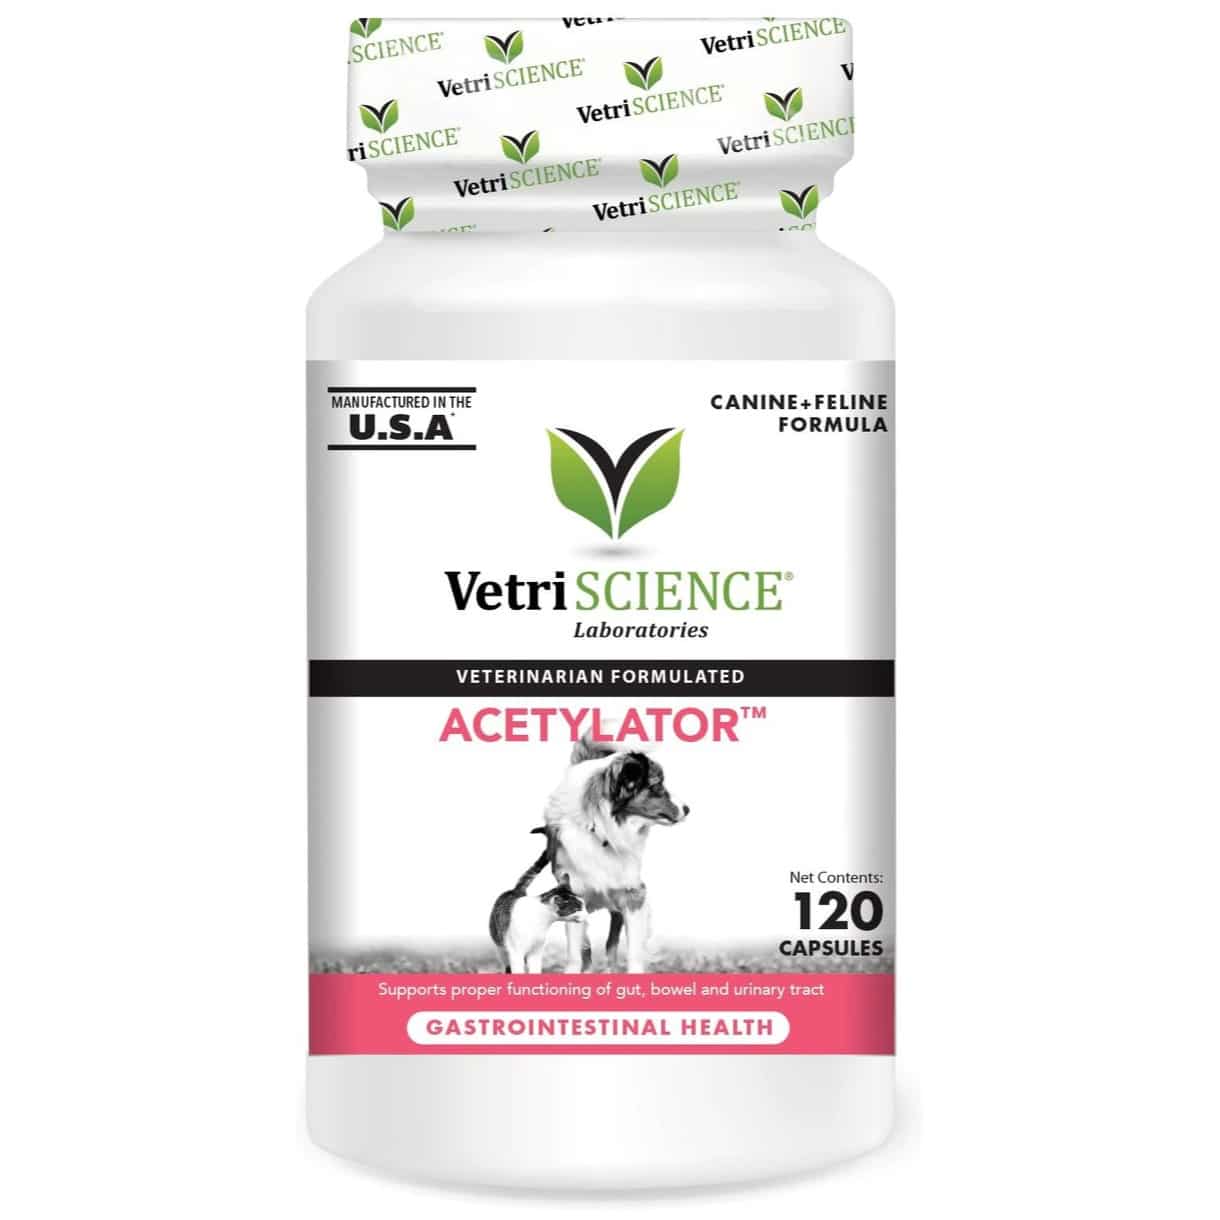 VetriScience Acetylator Capsules Digestive Supplement for Cats & Dogs